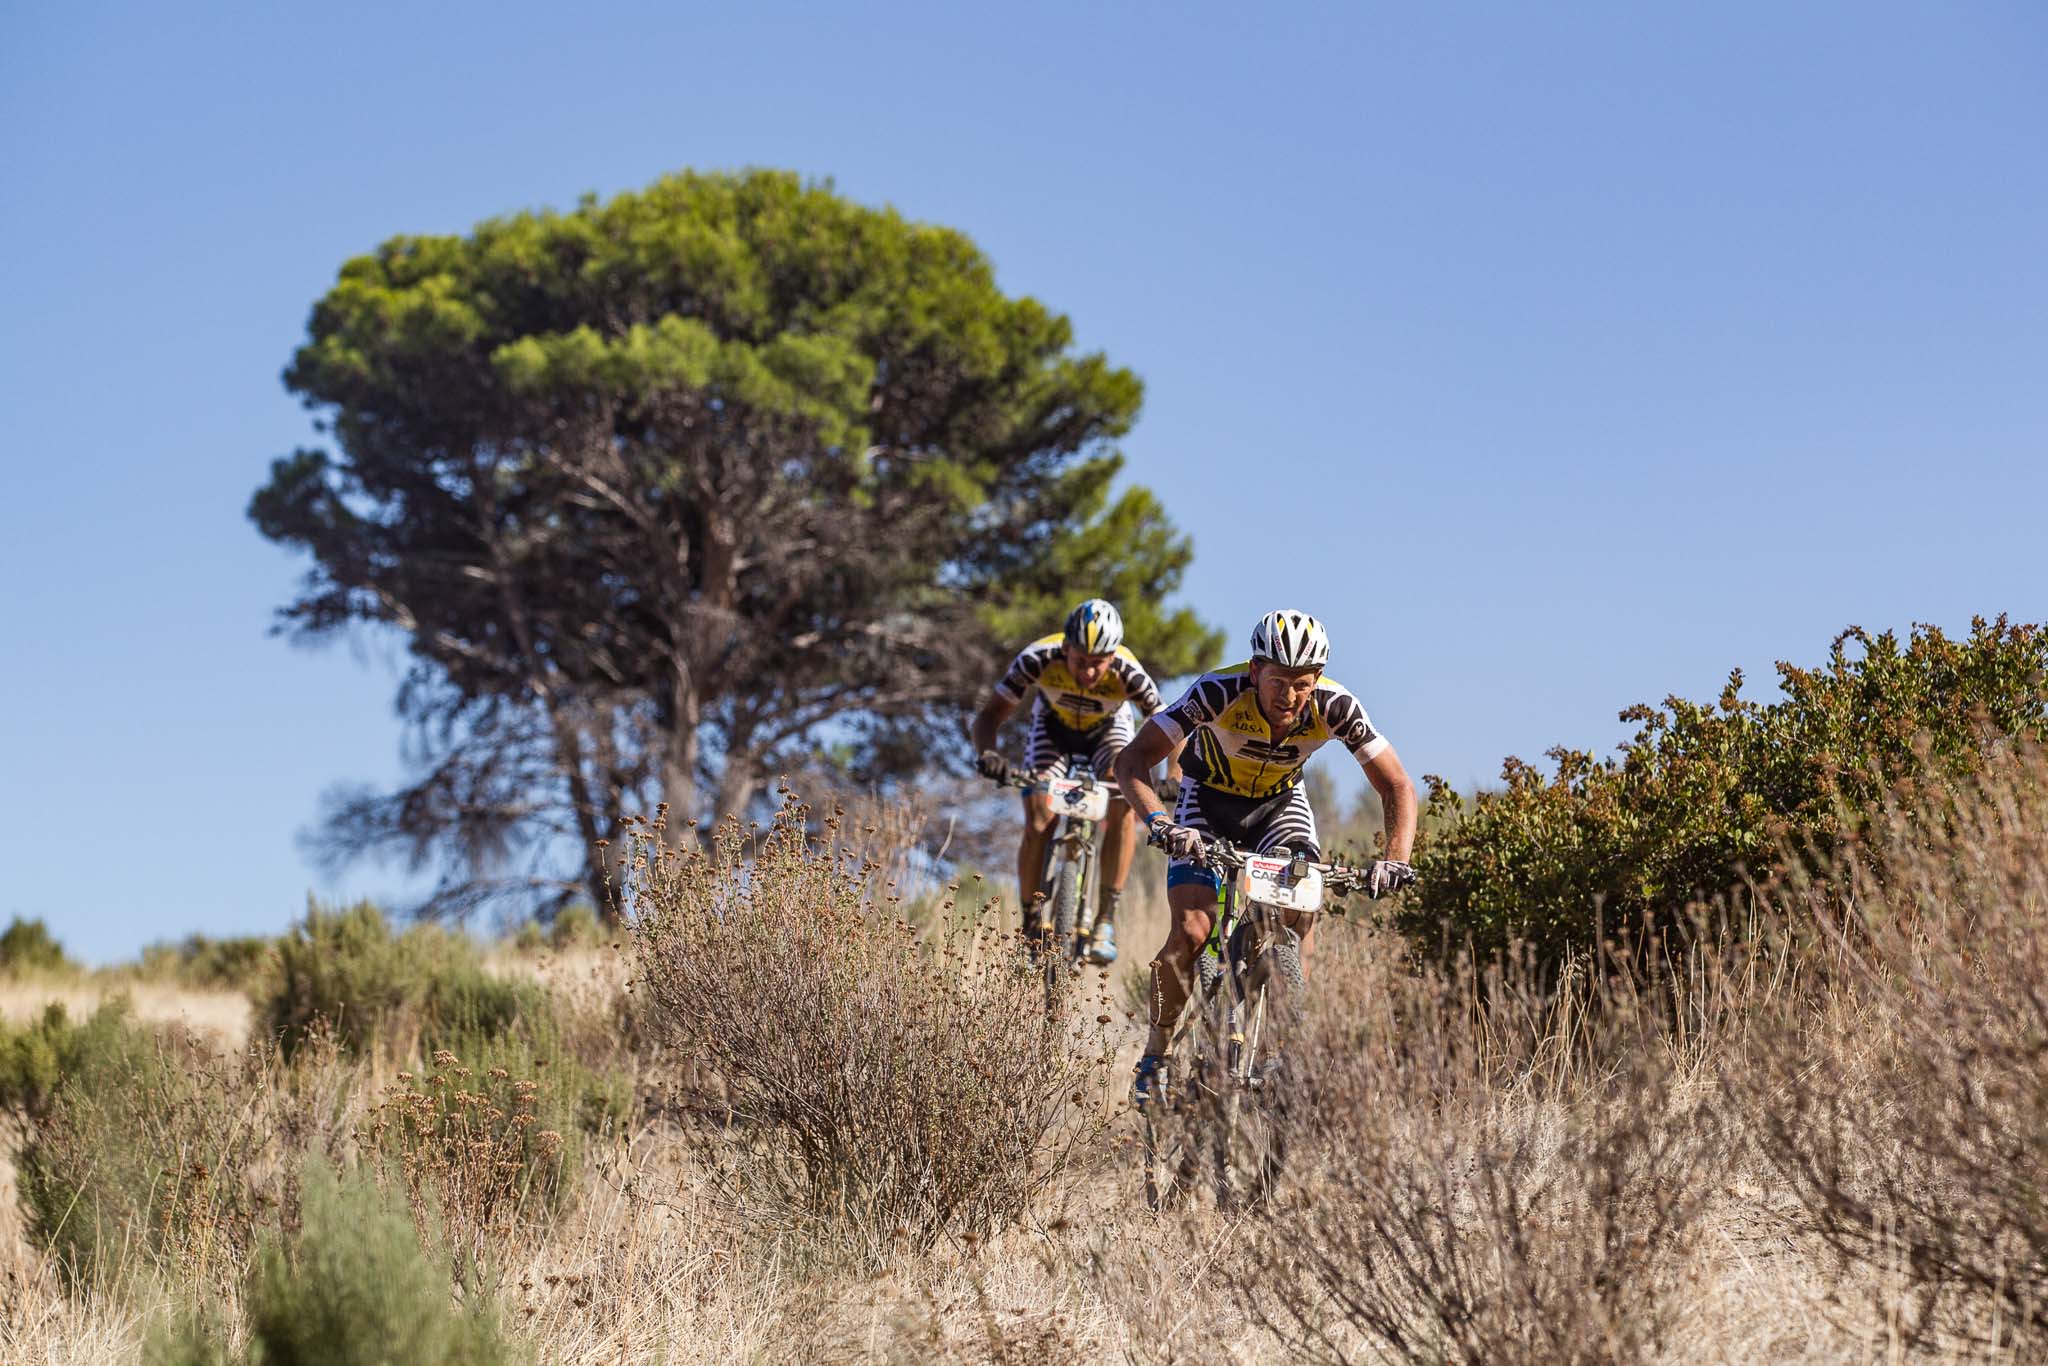 Karl Platt and Urs Huber of Team Bulls 1 during stage 1 of the 2016 Absa Cape Epic Mountain Bike stage race held from Saronsberg Wine Estate in Tulbagh, South Africa on the 14th March 2016 Photo by Nick Muzik/Cape Epic/SPORTZPICS PLEASE ENSURE THE APPROPRIATE CREDIT IS GIVEN TO THE PHOTOGRAPHER AND SPORTZPICS ALONG WITH THE ABSA CAPE EPIC {ace2016}